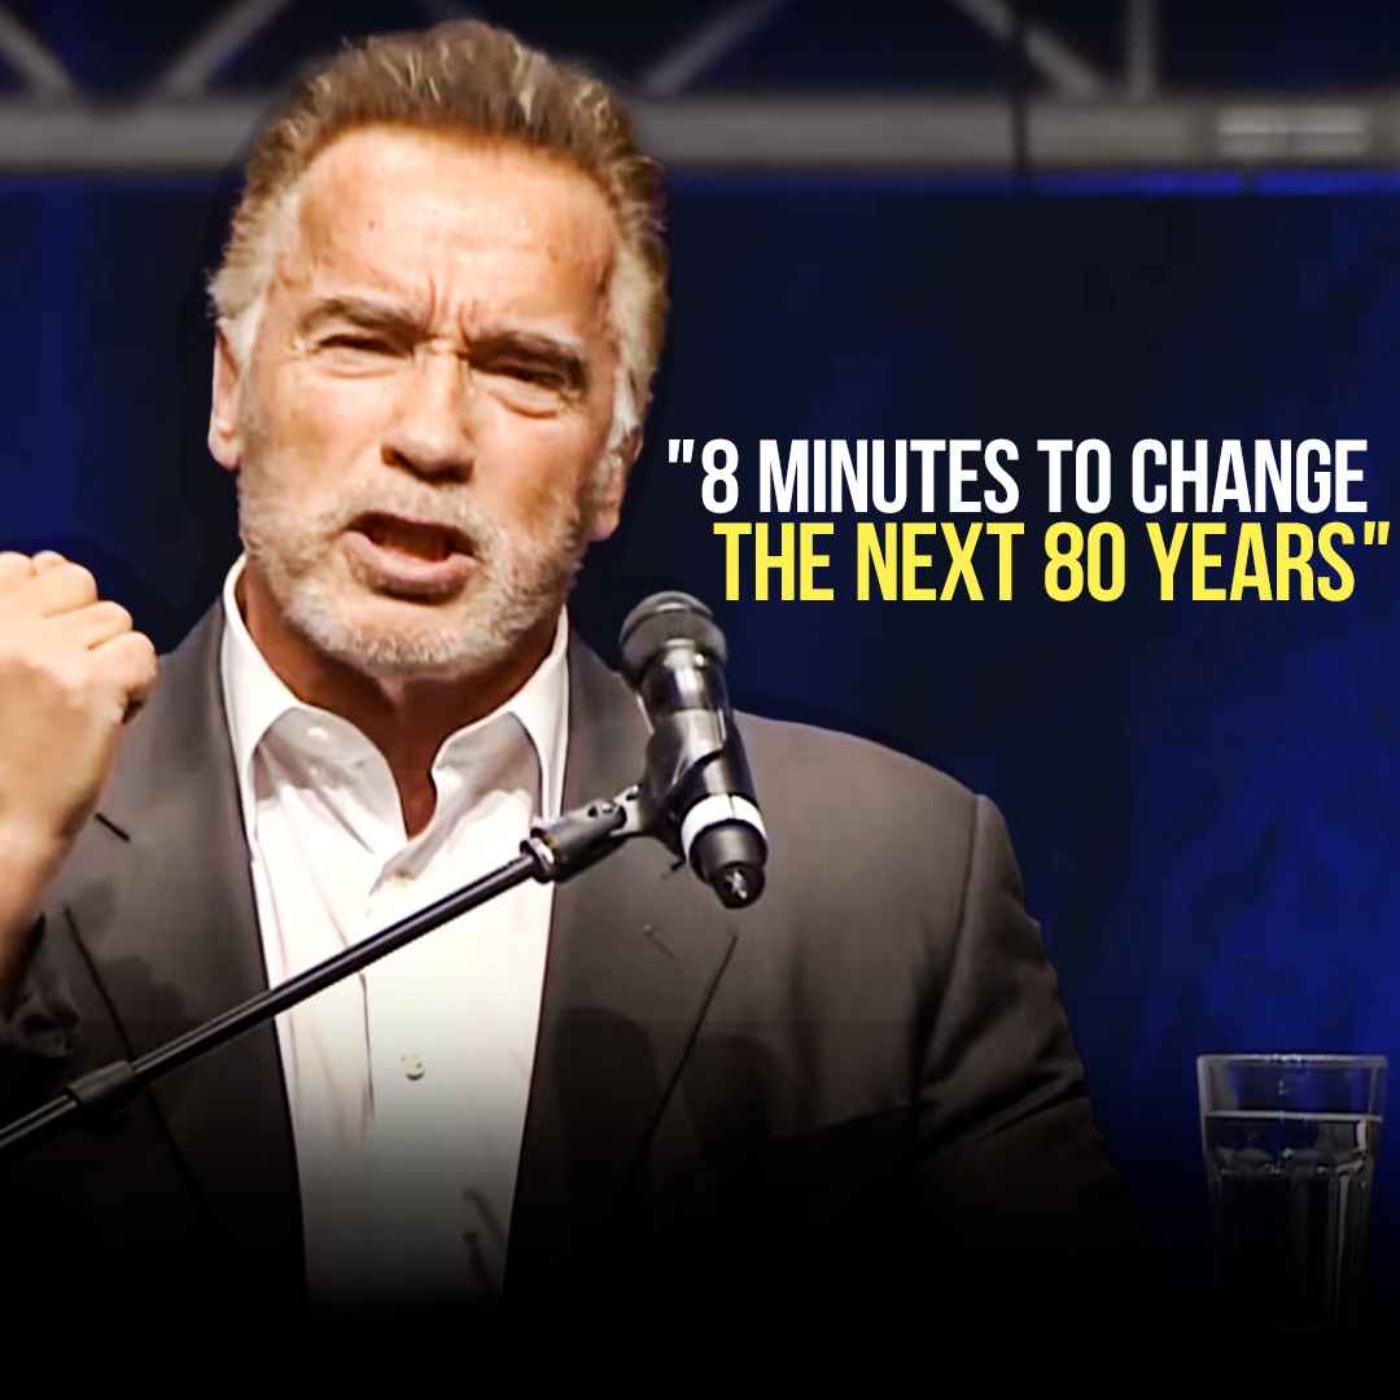 8 MINUTES FOR THE NEXT 80 YEARS | Arnold Schwarzenegger - One of the Best Motivational Speeches Ever